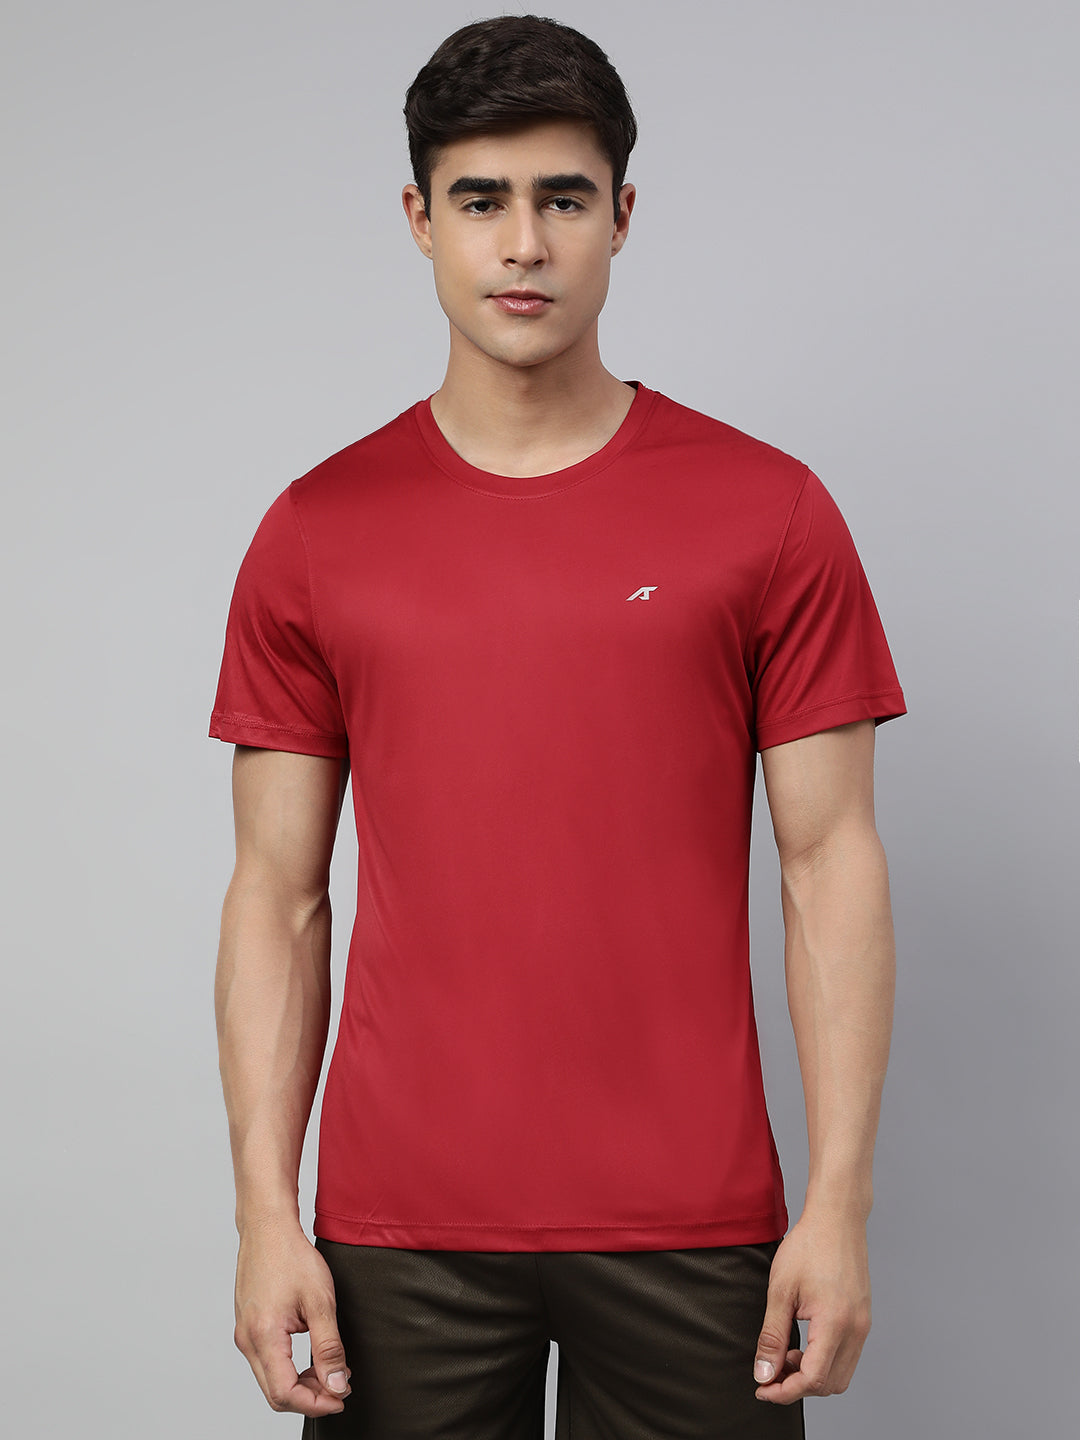 Alcis Men's Red Anti-Static Soft-Touch Slim-Fit Sports for All Round Neck Wonder T-Shirt